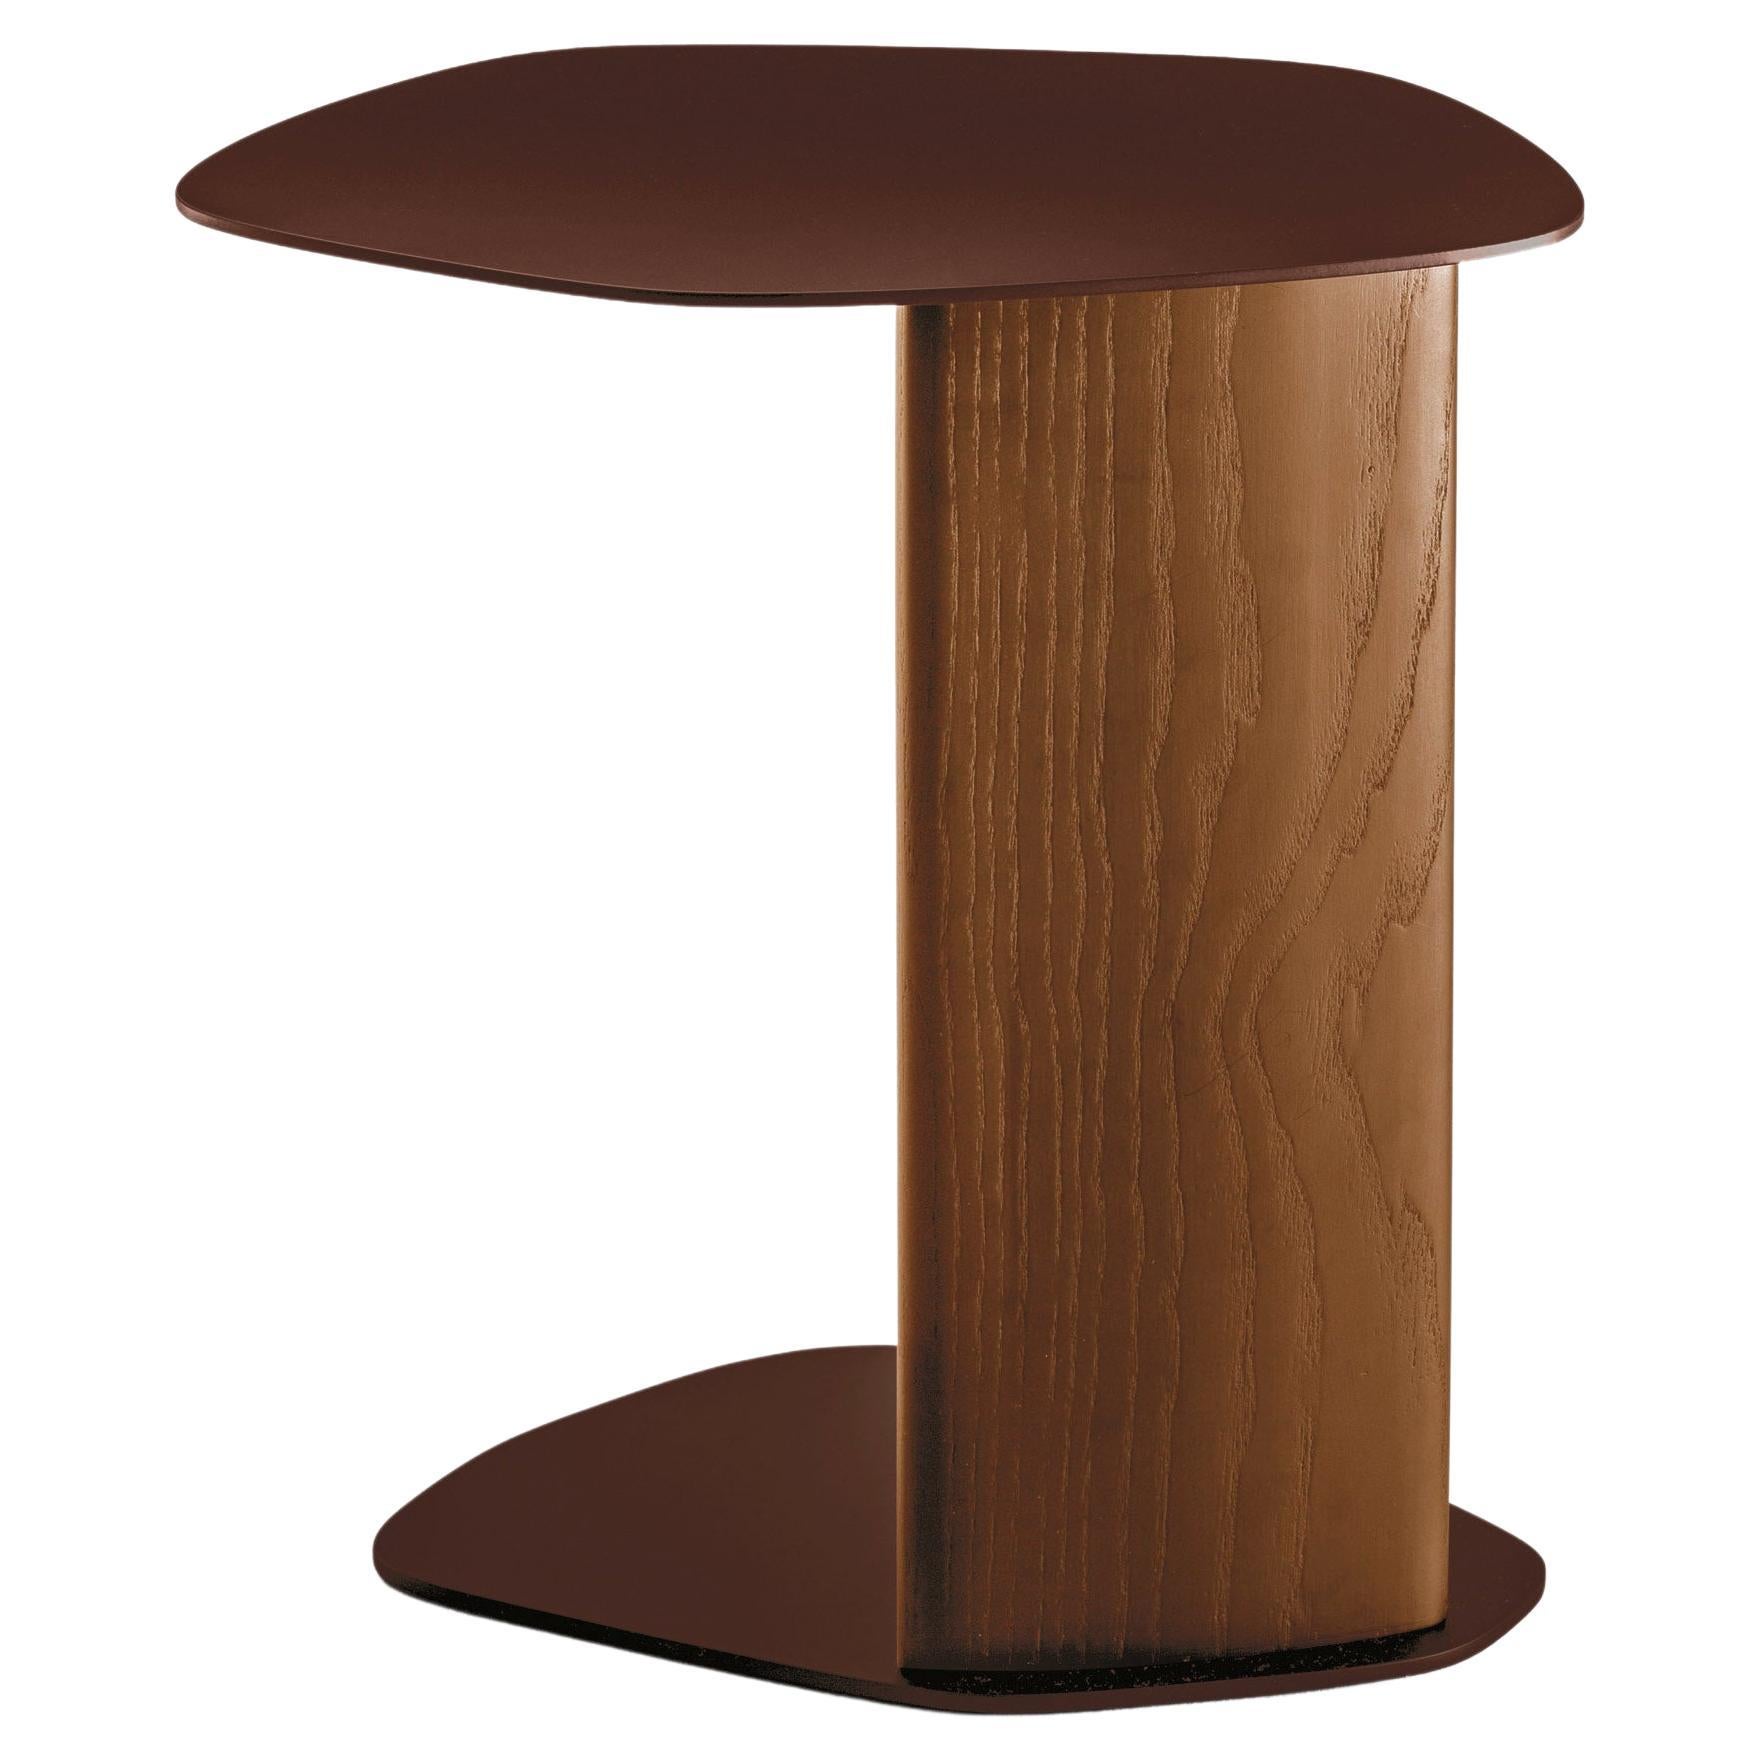 Keisho Coffee Table in Plum Top with Walnut Stained Ssh Base by Andrea Steidl For Sale